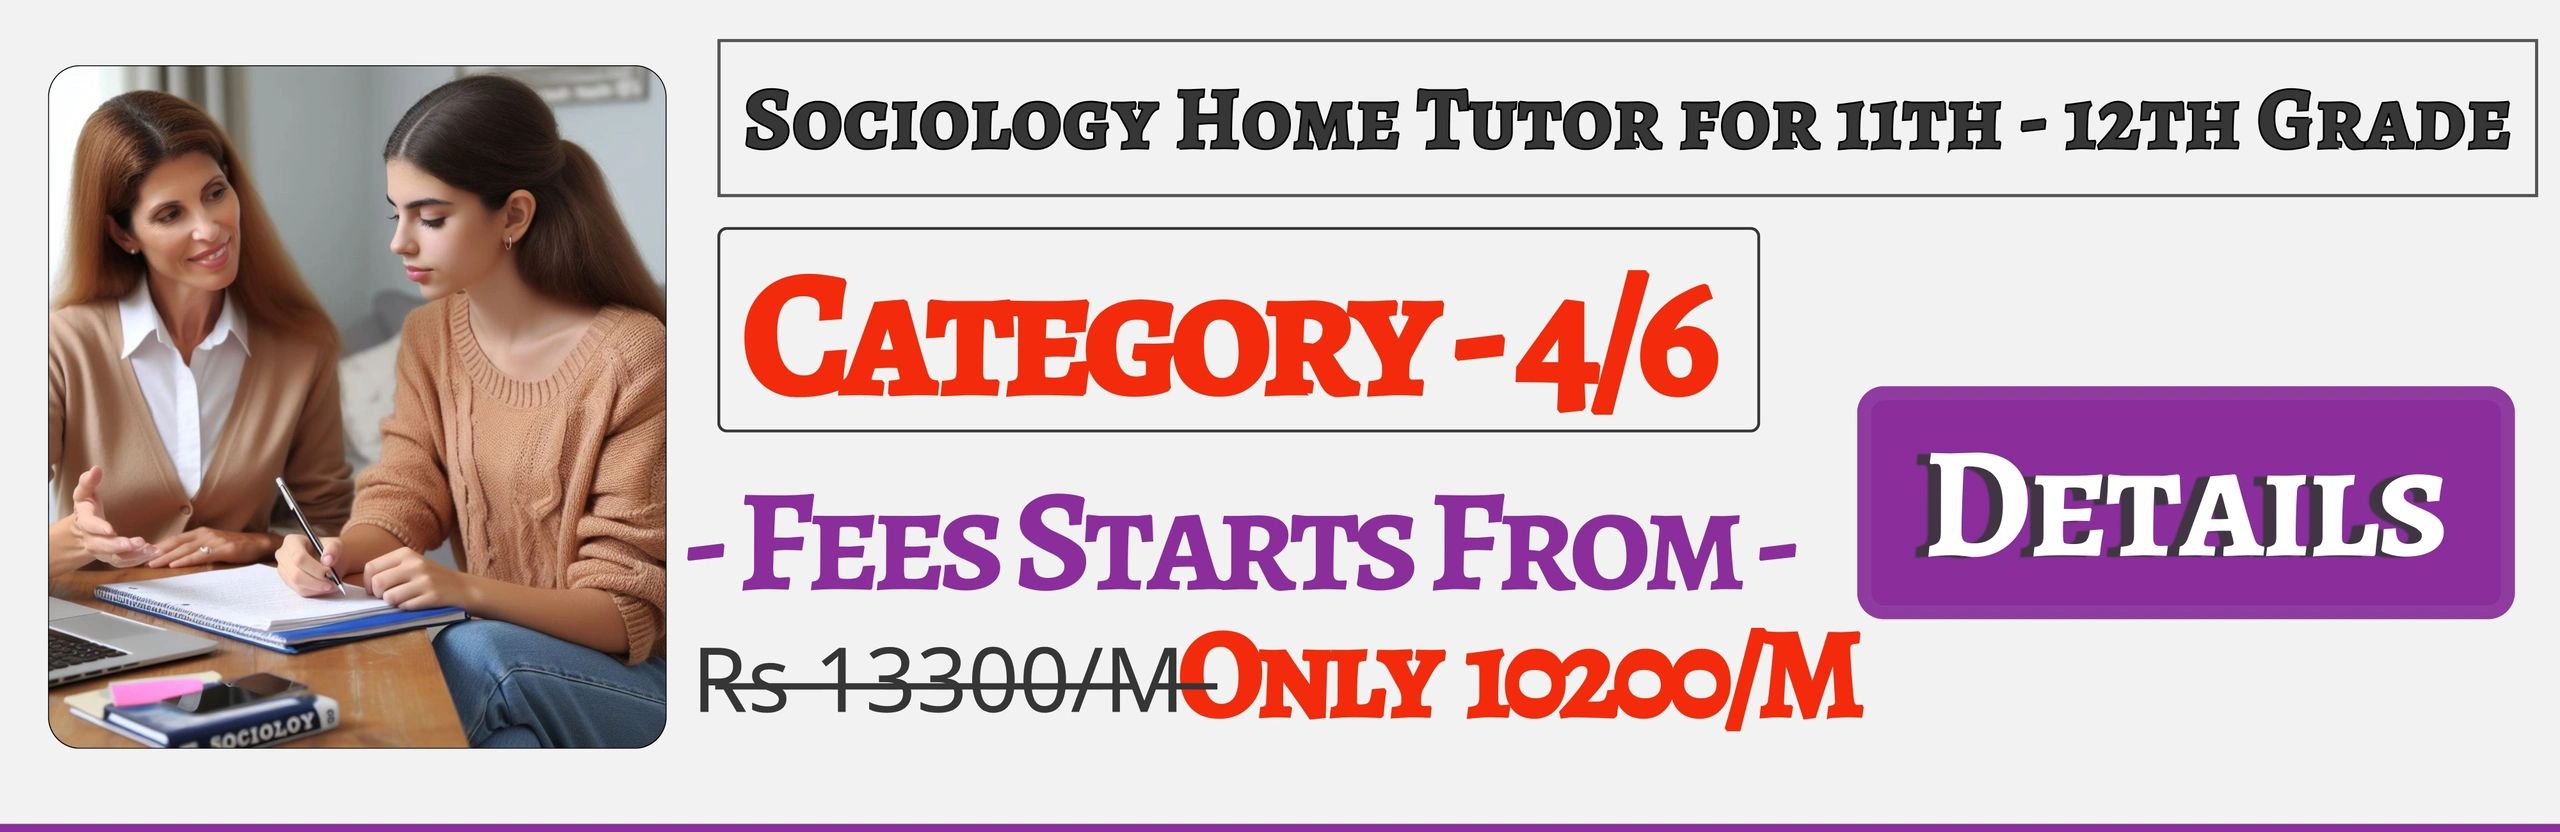 Book Best Nearby Sociology Home Tuition Tutors For 11th & 12th In Jaipur , Fees Only 10200/M